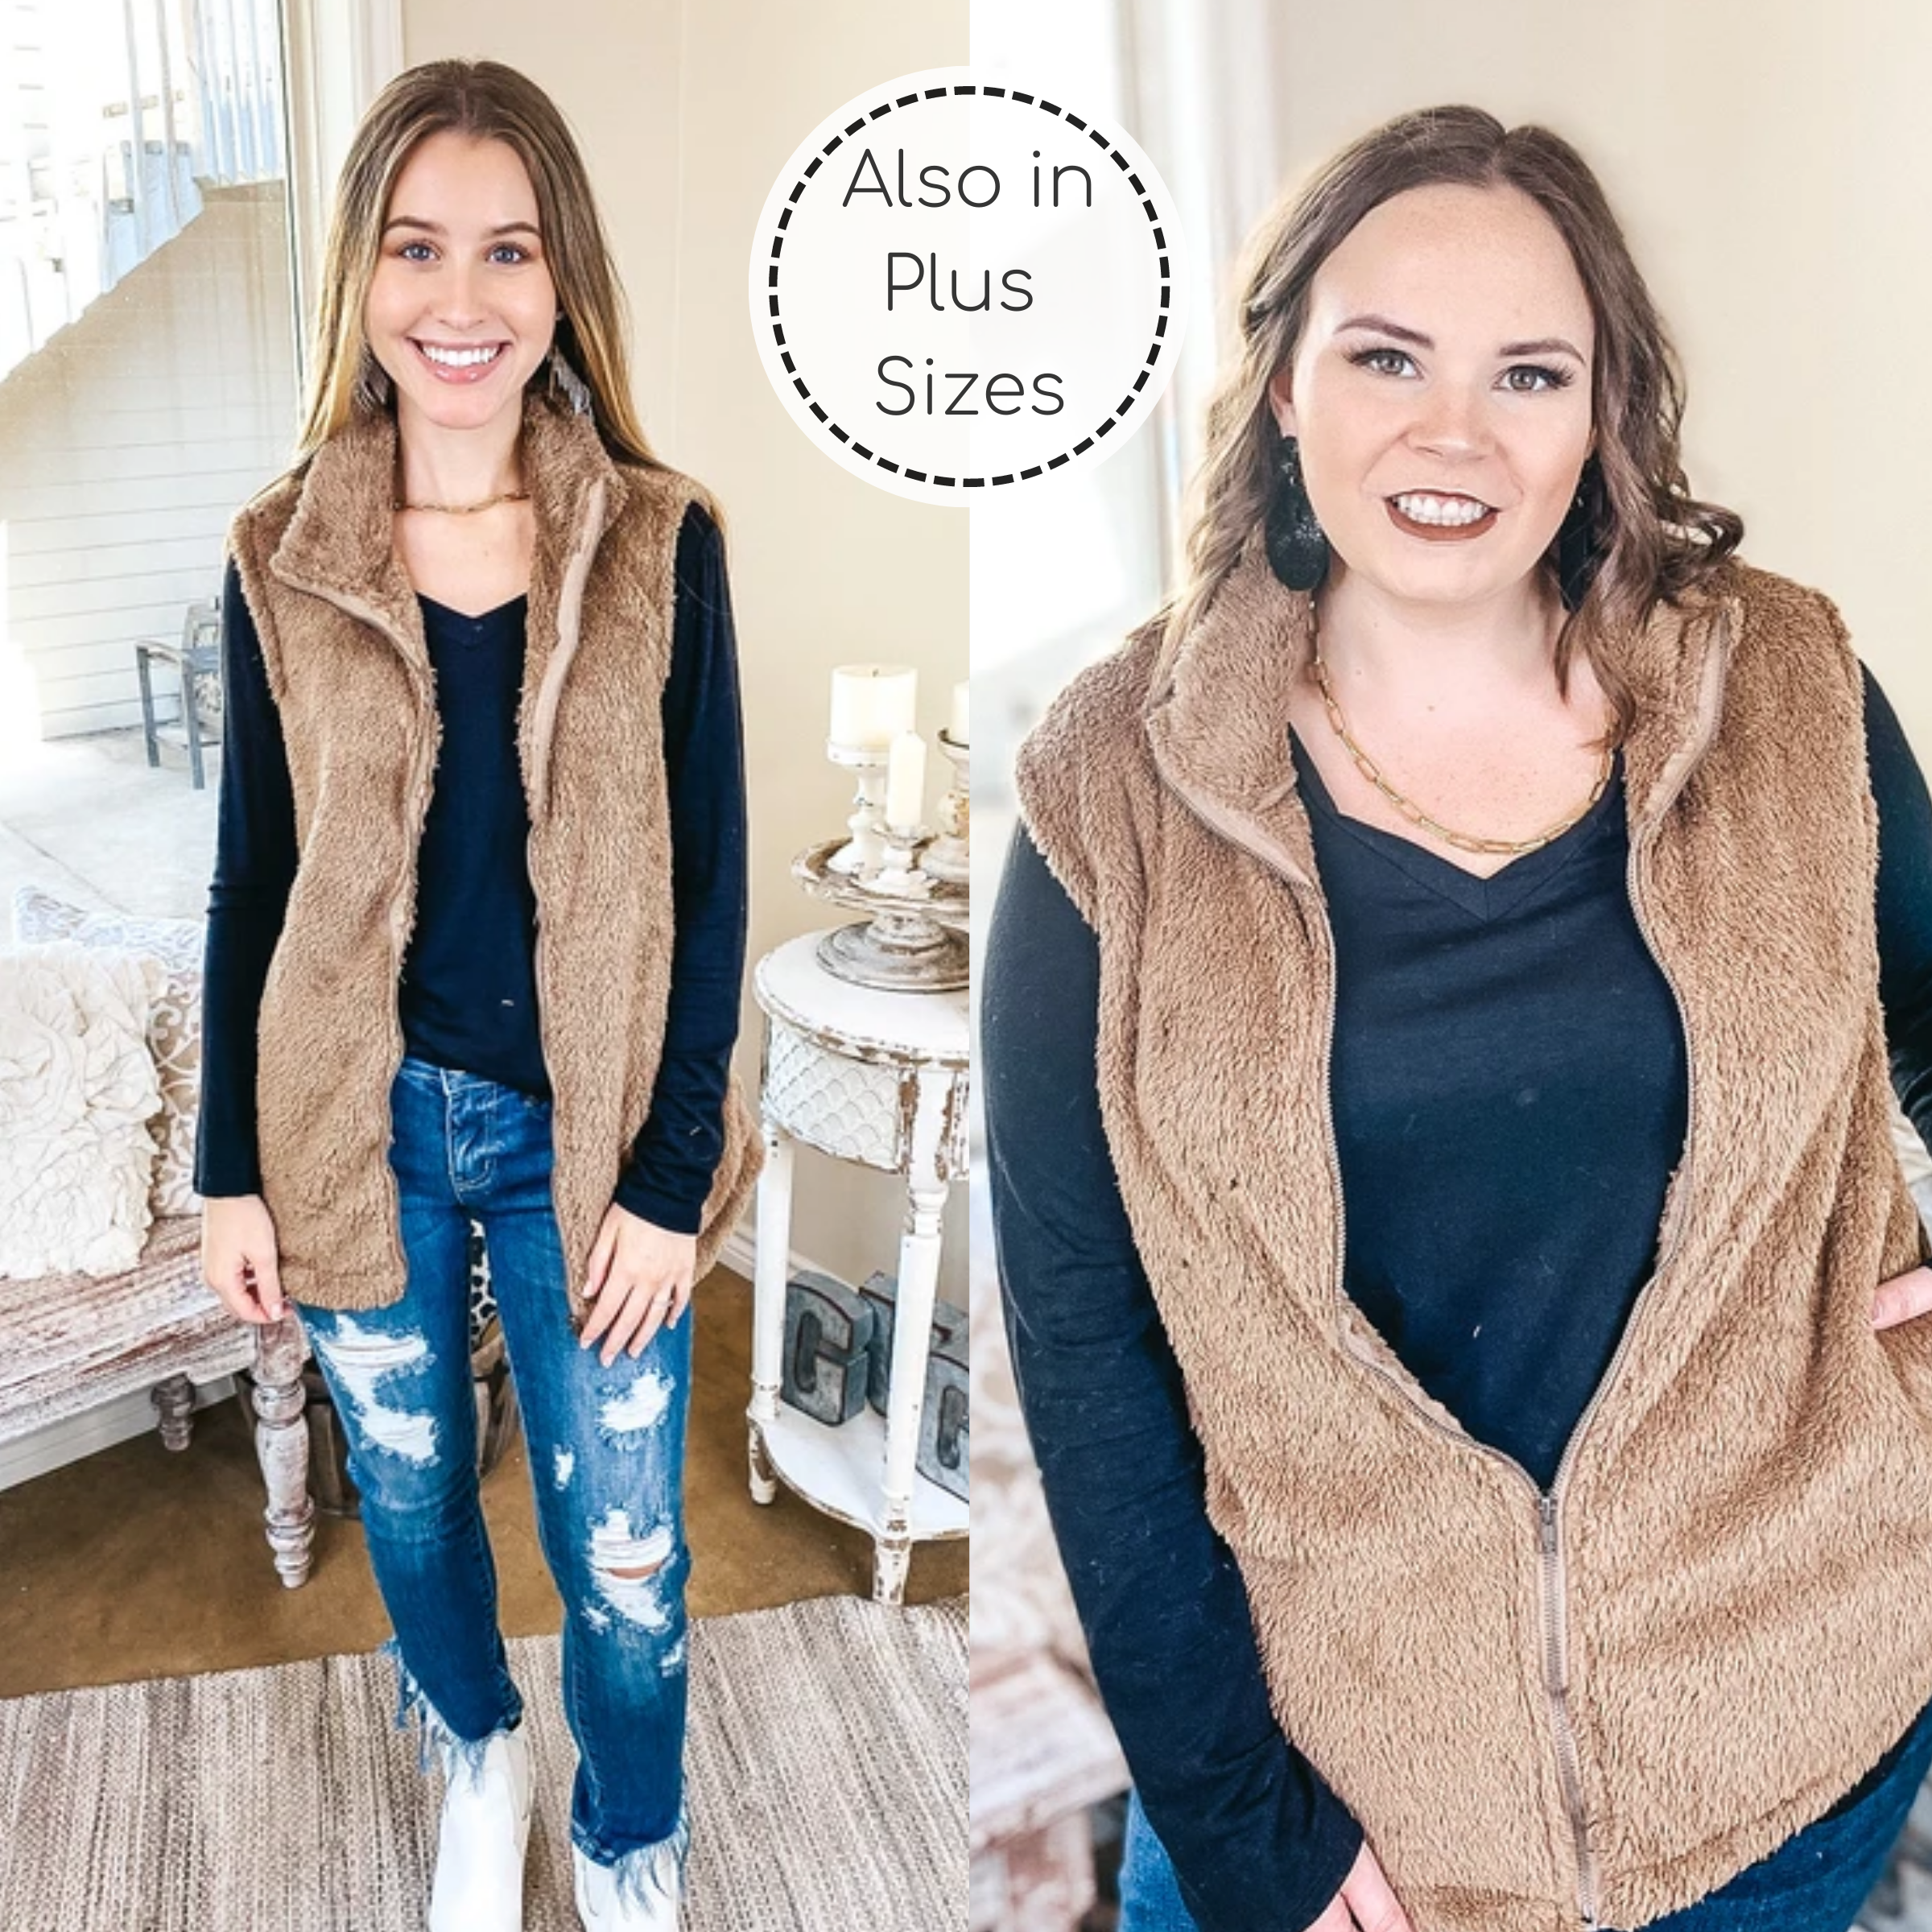 Up North Zip Up Wubby Vest with Pockets in Mocha Brown - Giddy Up Glamour Boutique